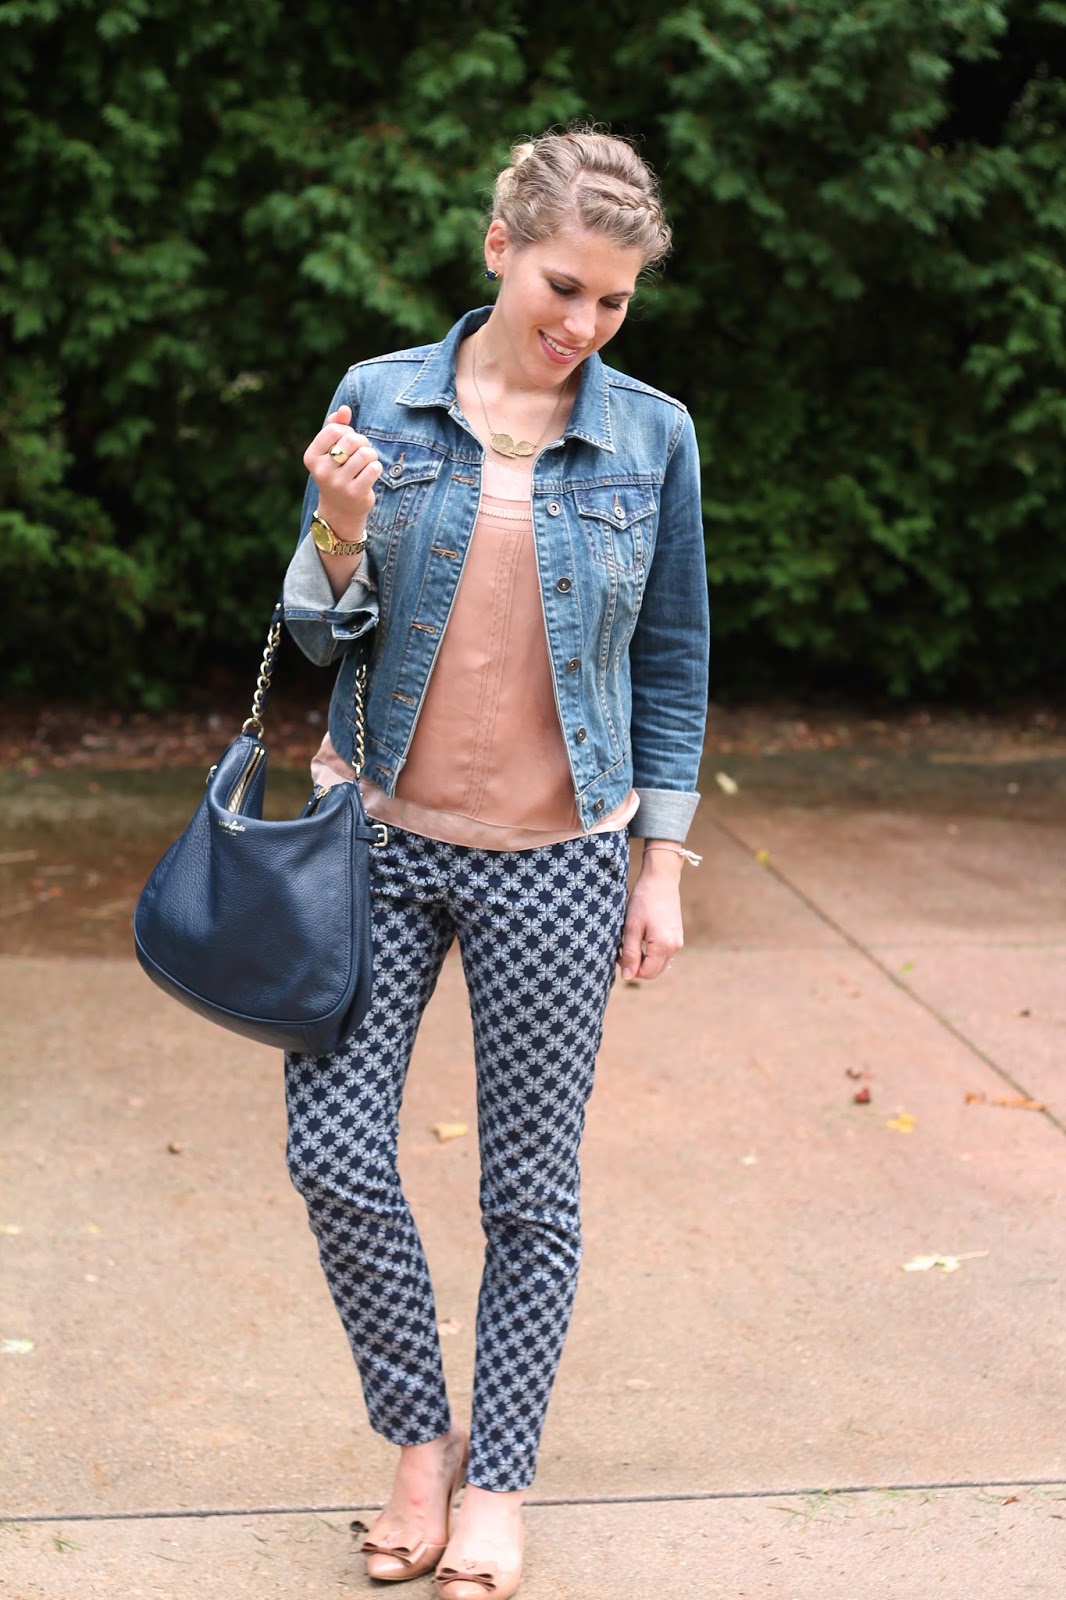 3 Tips for Shopping for Patterned Bottoms